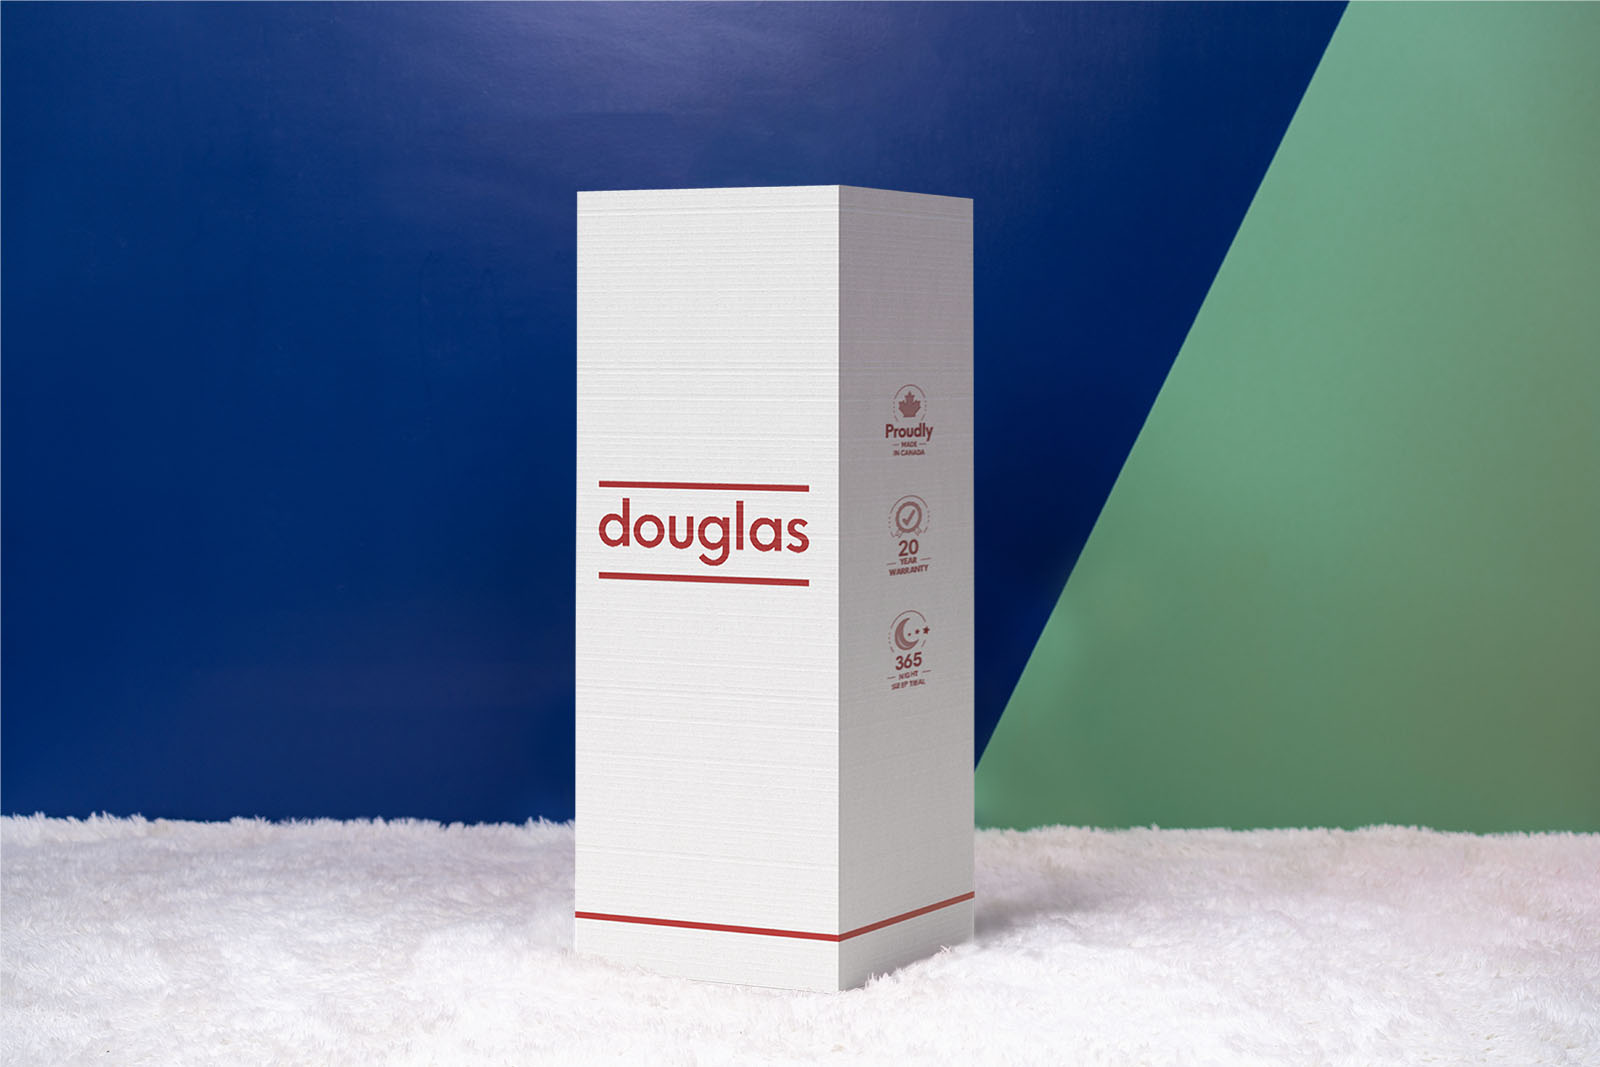 Photo of the Douglas Original Mattress box on the floor in a bedroom taken from a front angle.